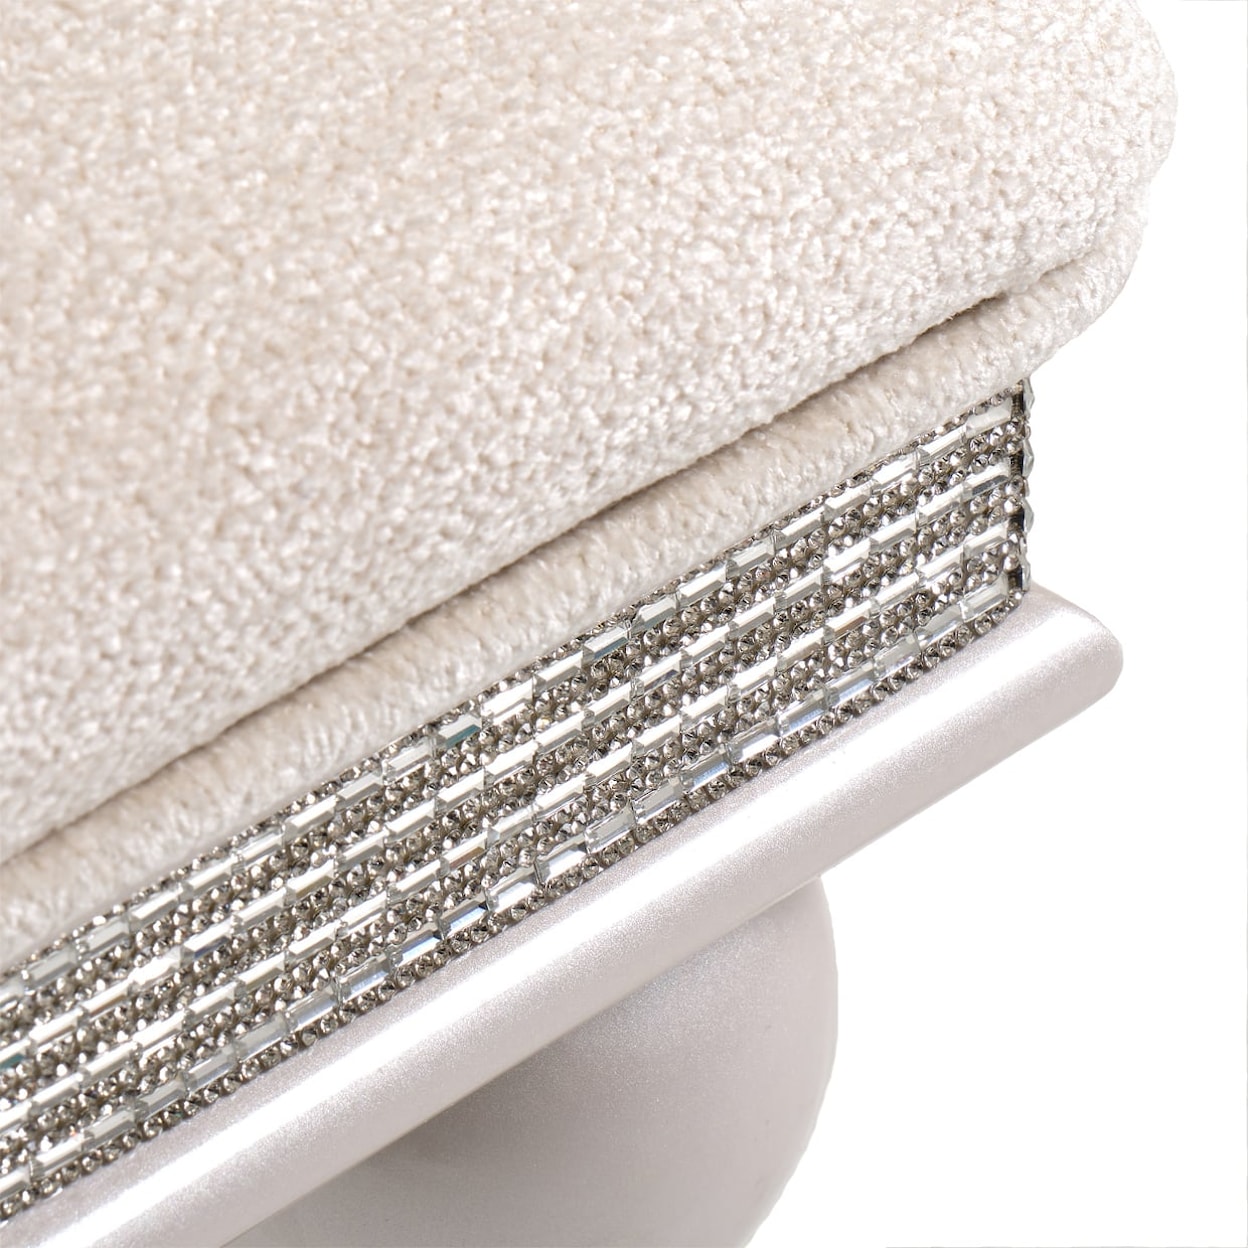 Michael Amini Glimmering Heights Upholstered Vanity Bench